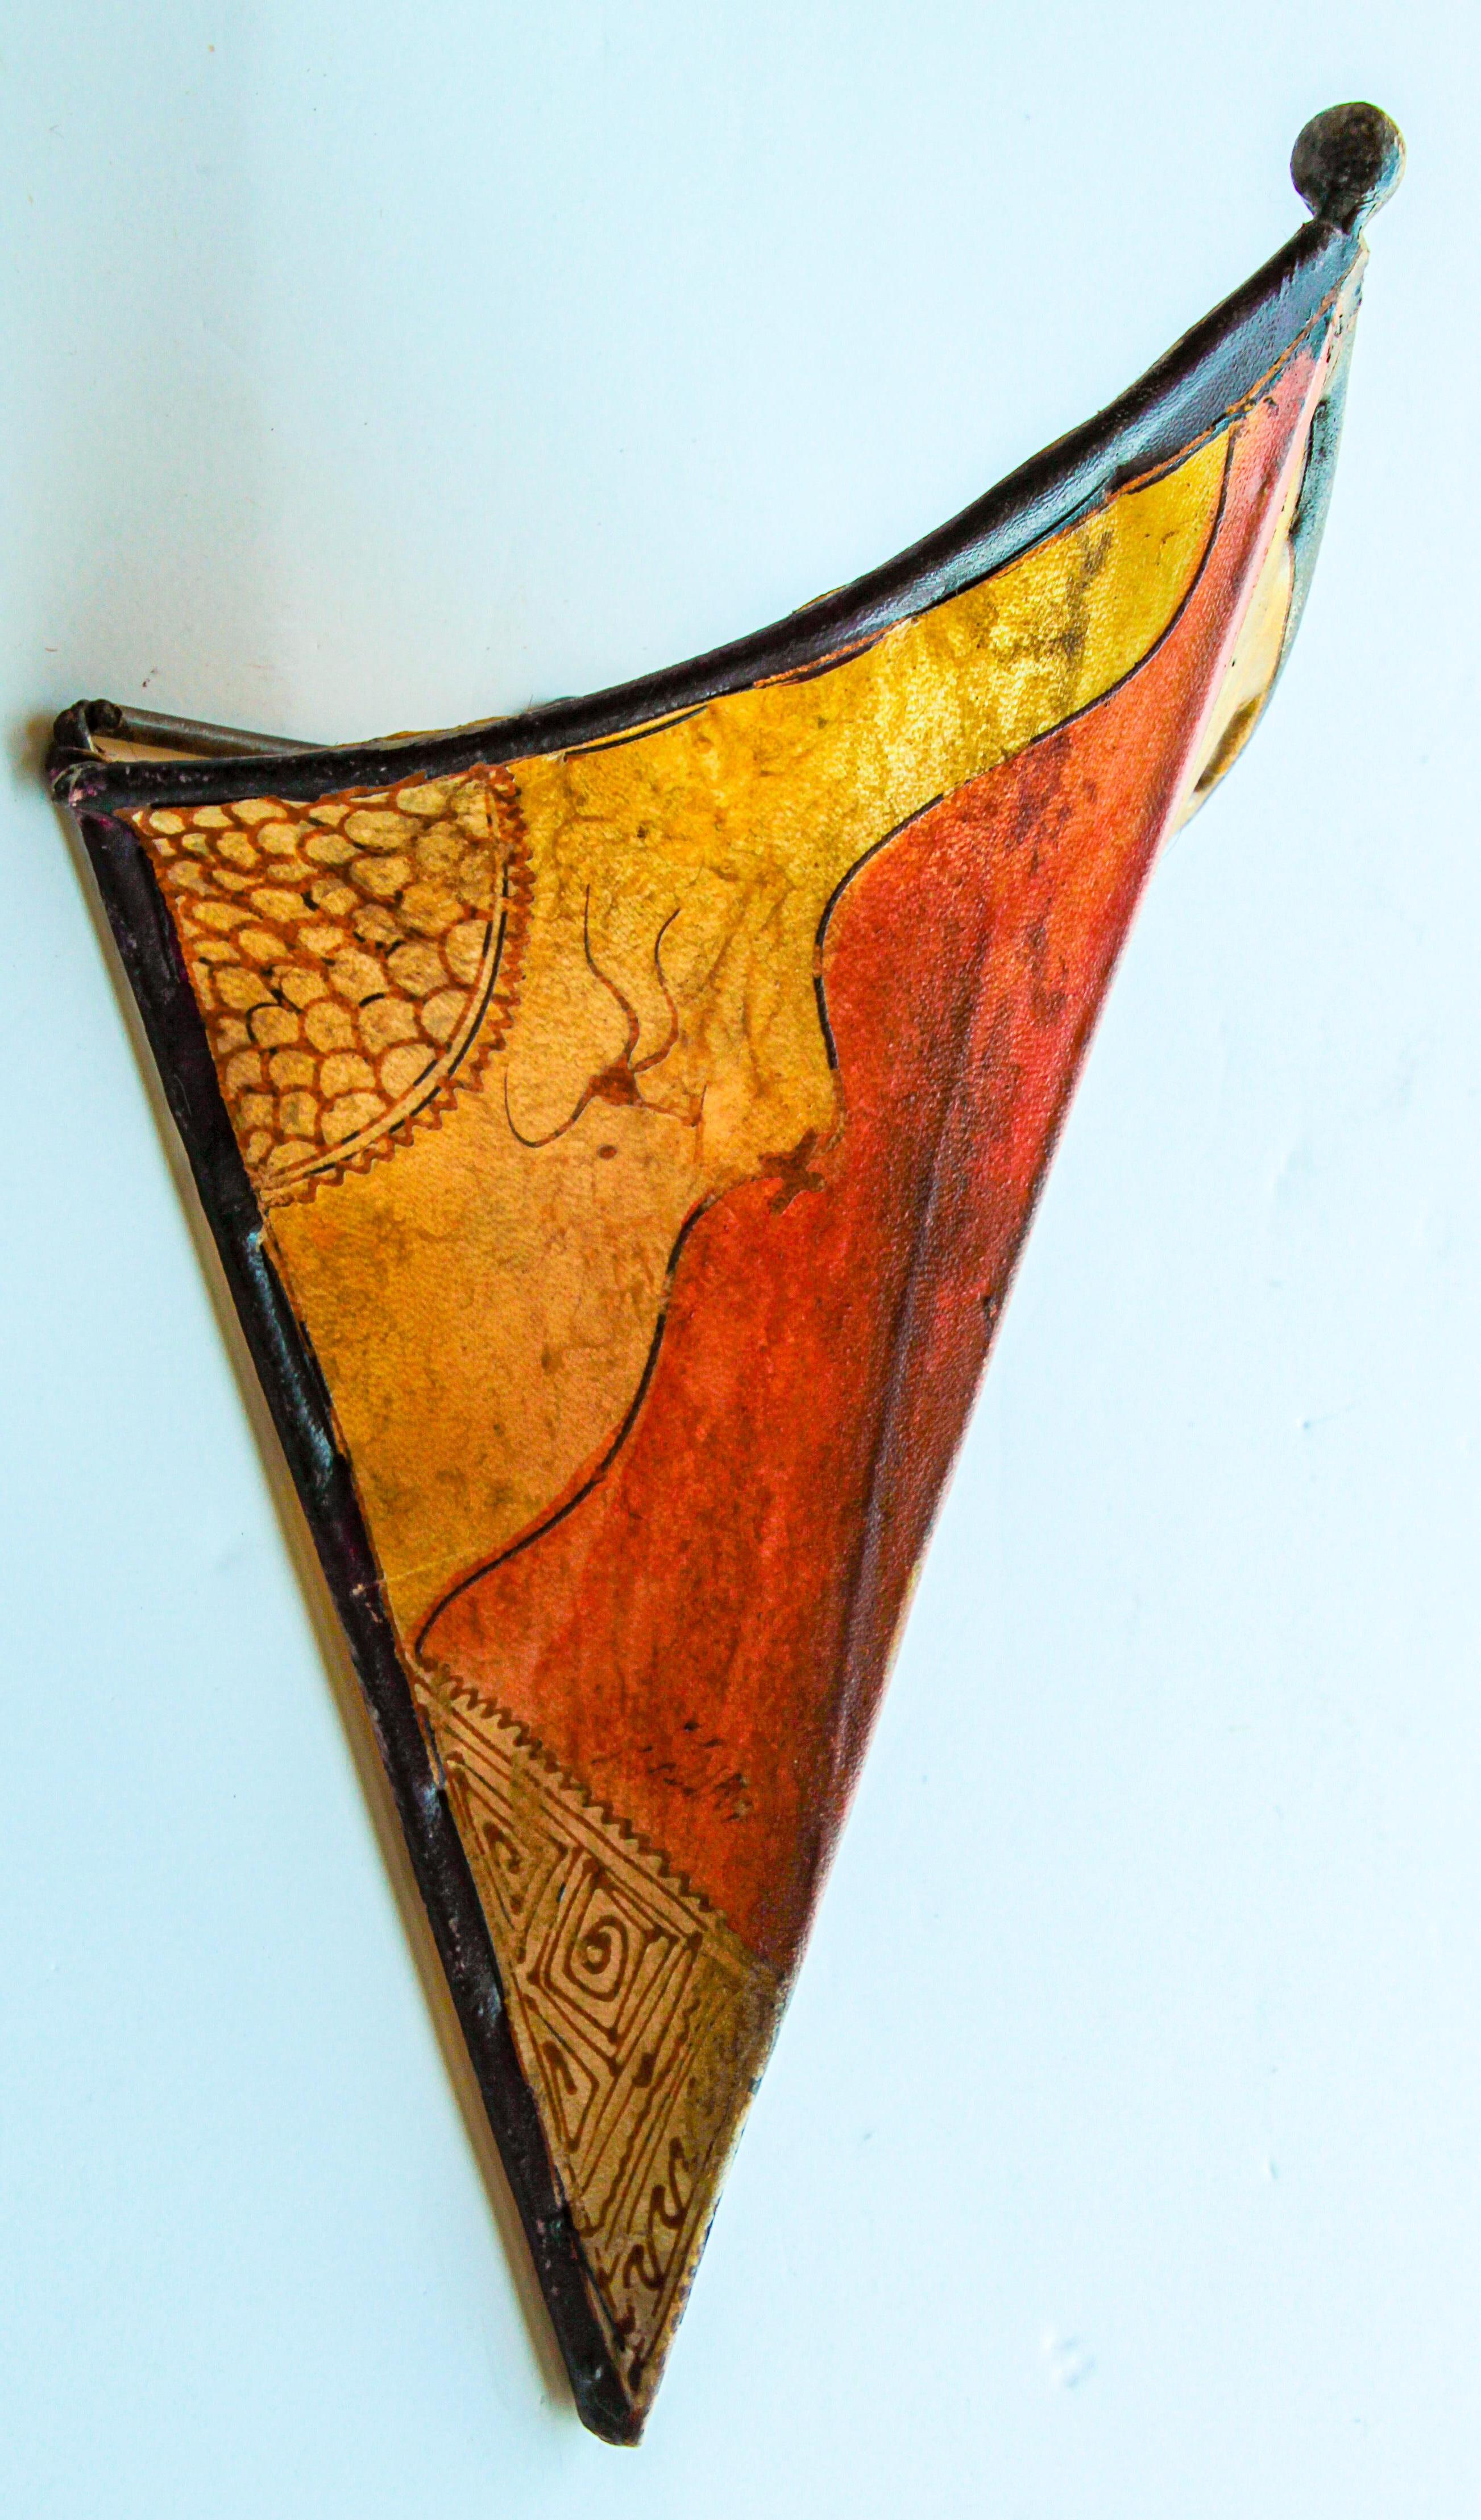 African Tribal Art parchment wall shade sconce featuring a large triangle hide form stitched on iron and hand painted surface.
These Moroccan art pieces could be used as wall lamp shade.
Iron frame covered with hide parchment which has been hand